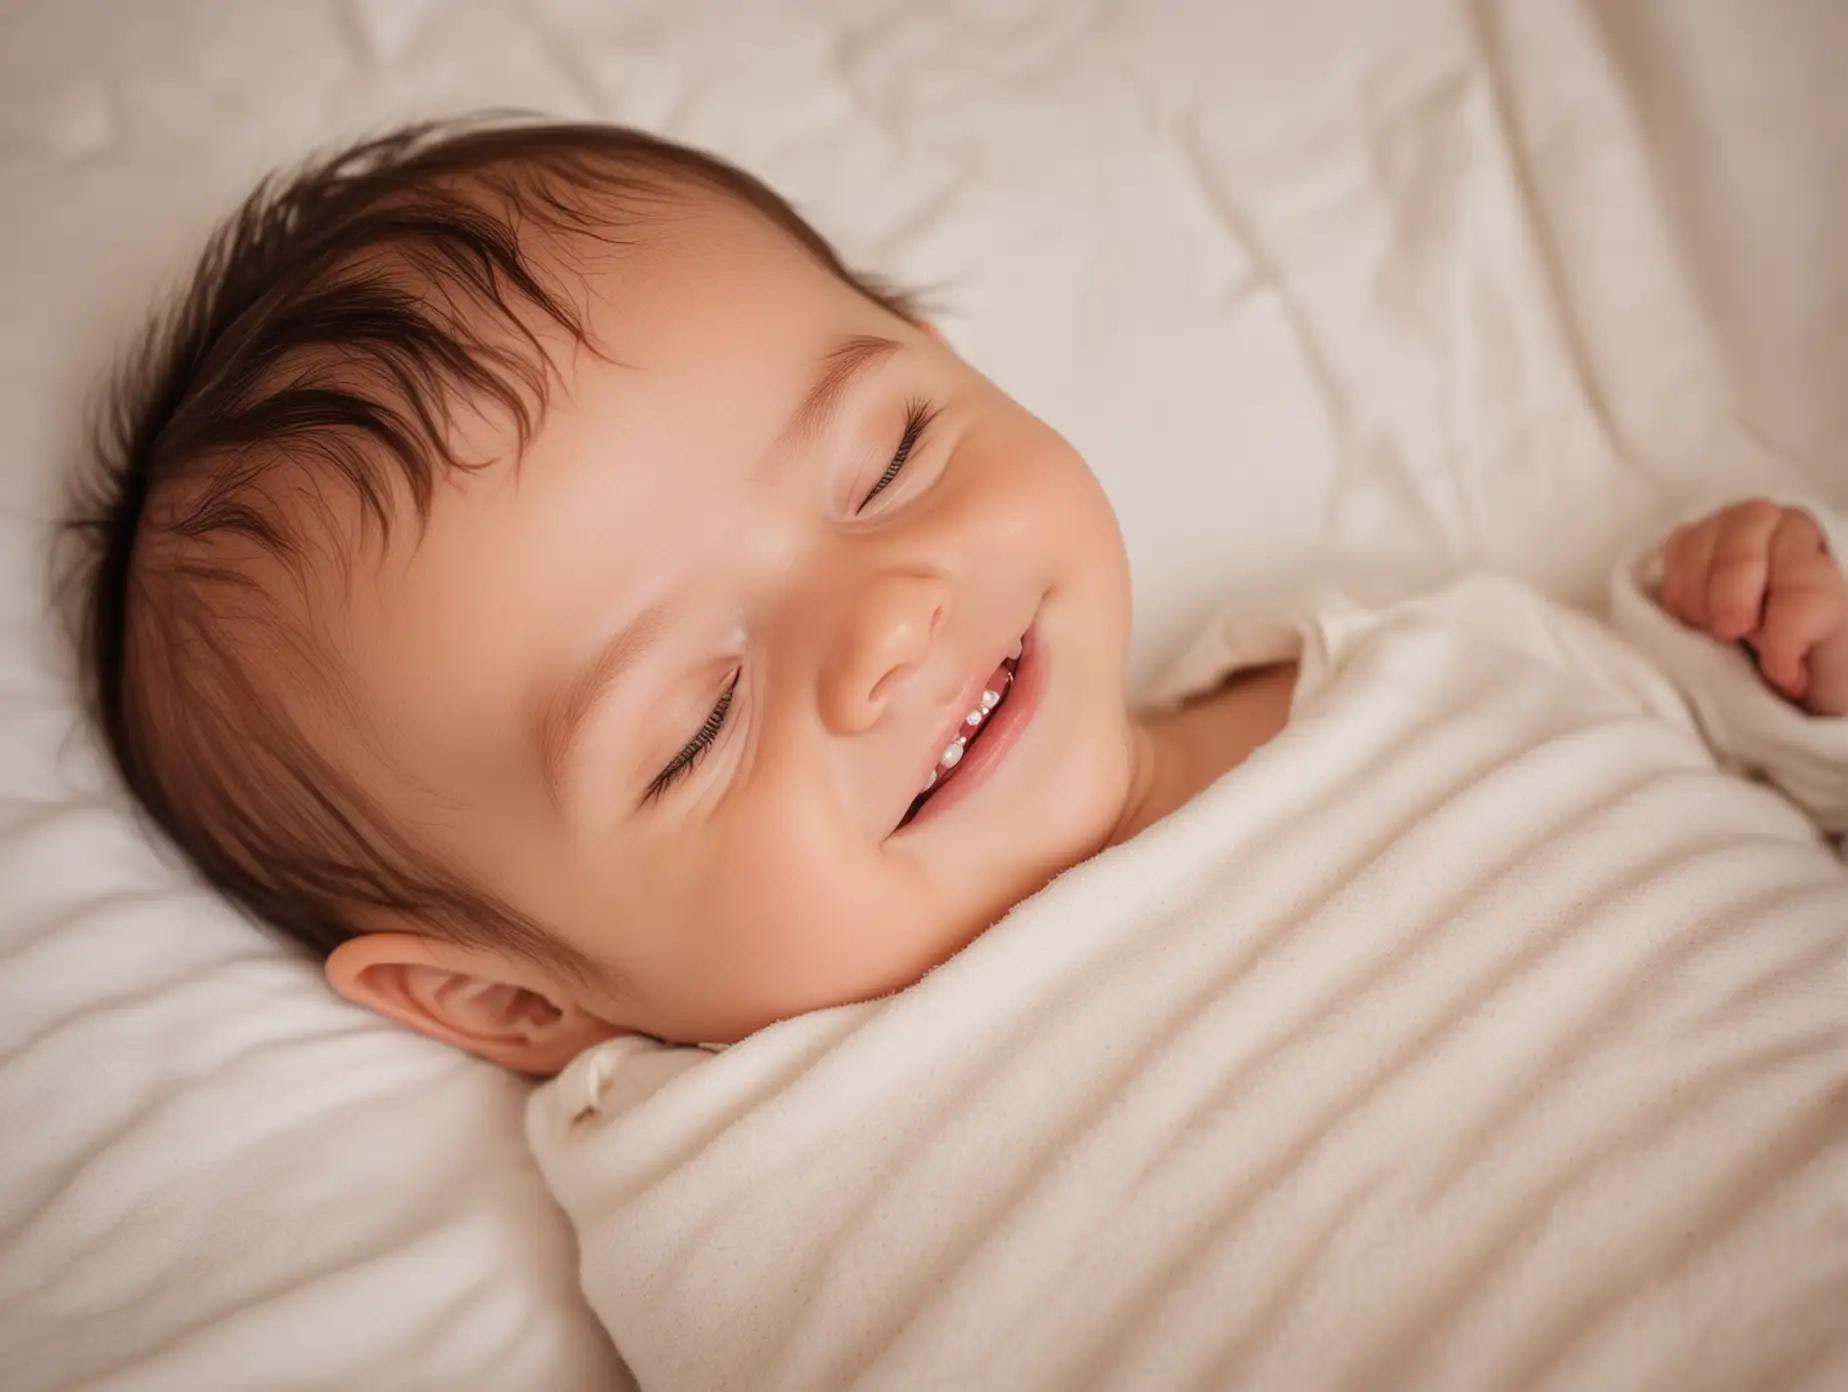 an image of a baby sleeping peacefully on a bed, smile